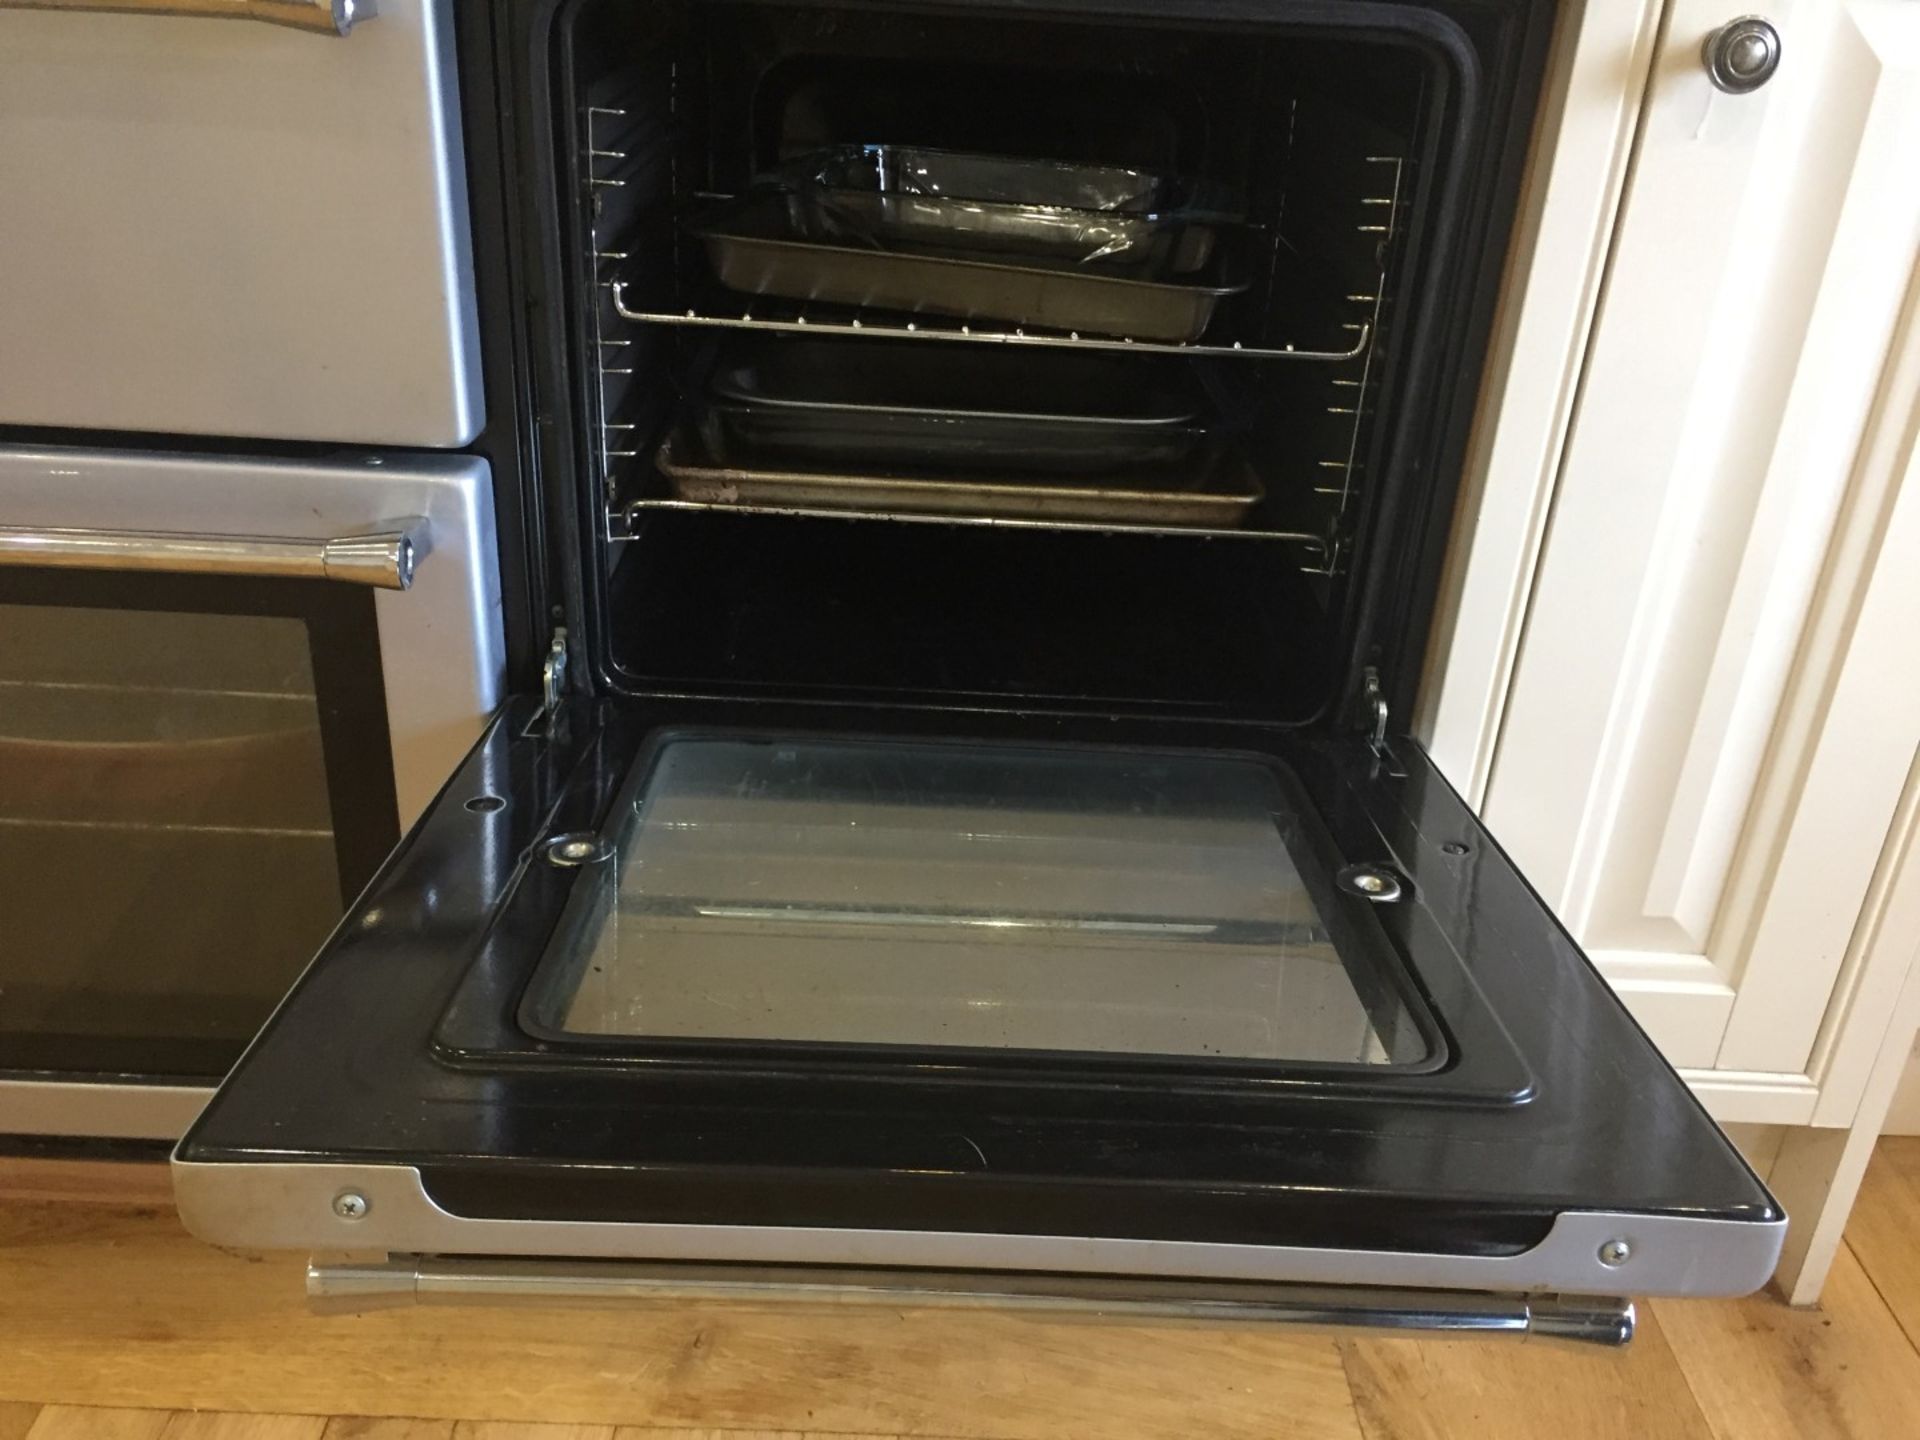 1 x Belling 100G Silver Countrychef 8-Burner, 2 Oven Range - In Good Working Condition - CL238 - - Image 7 of 13